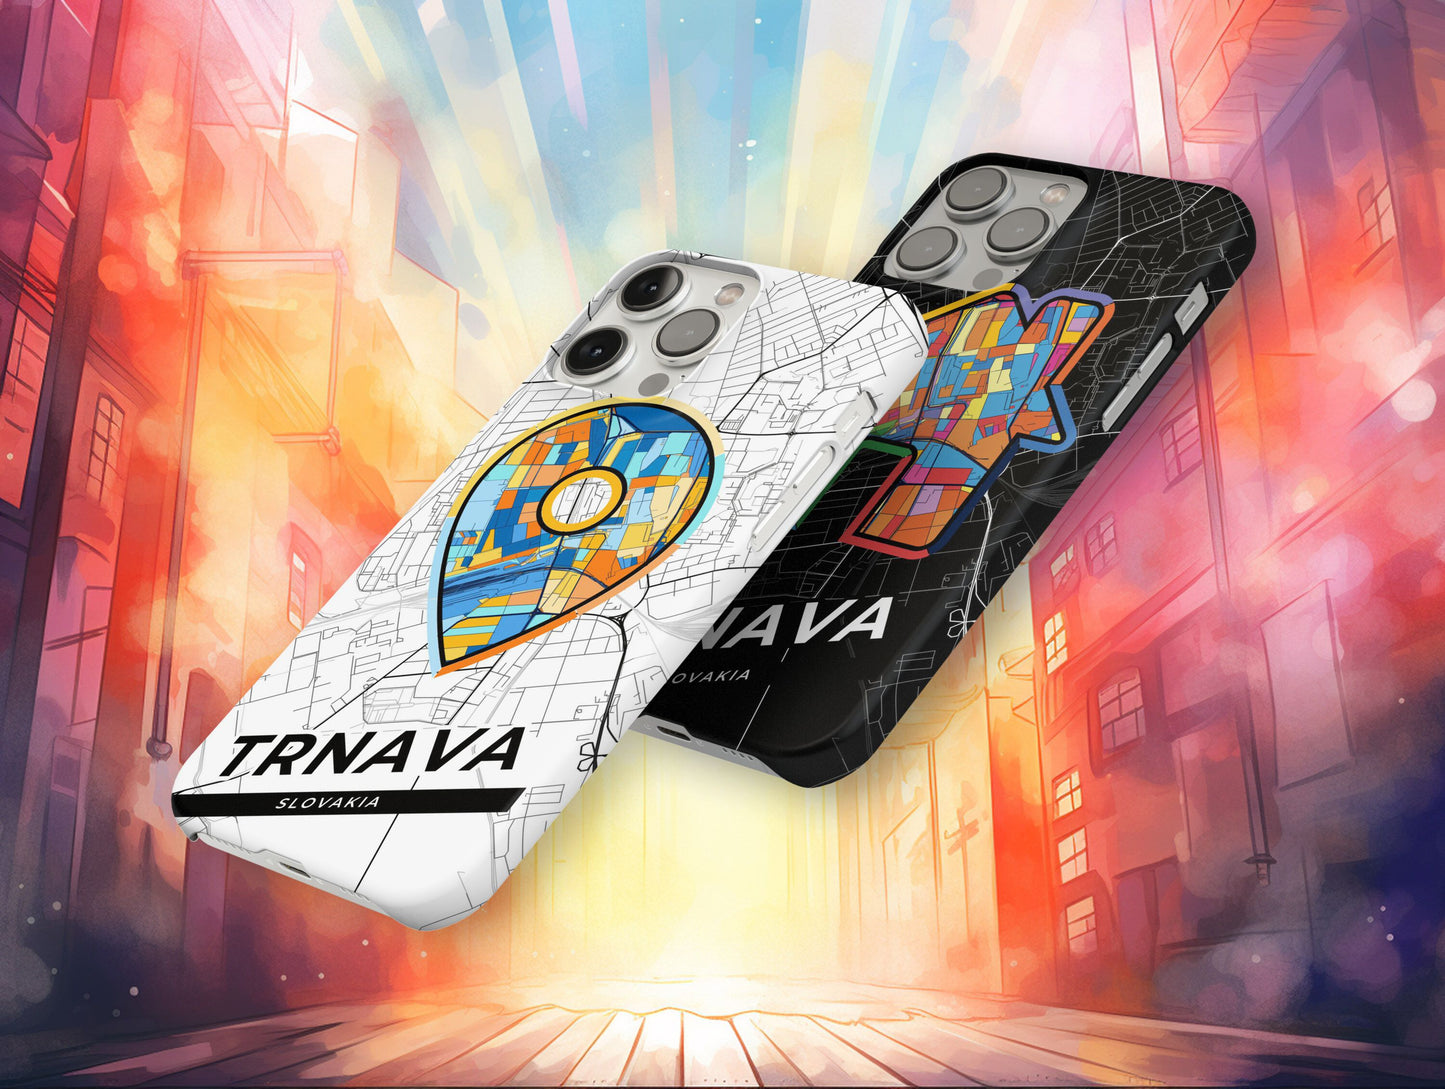 Trnava Slovakia slim phone case with colorful icon. Birthday, wedding or housewarming gift. Couple match cases.